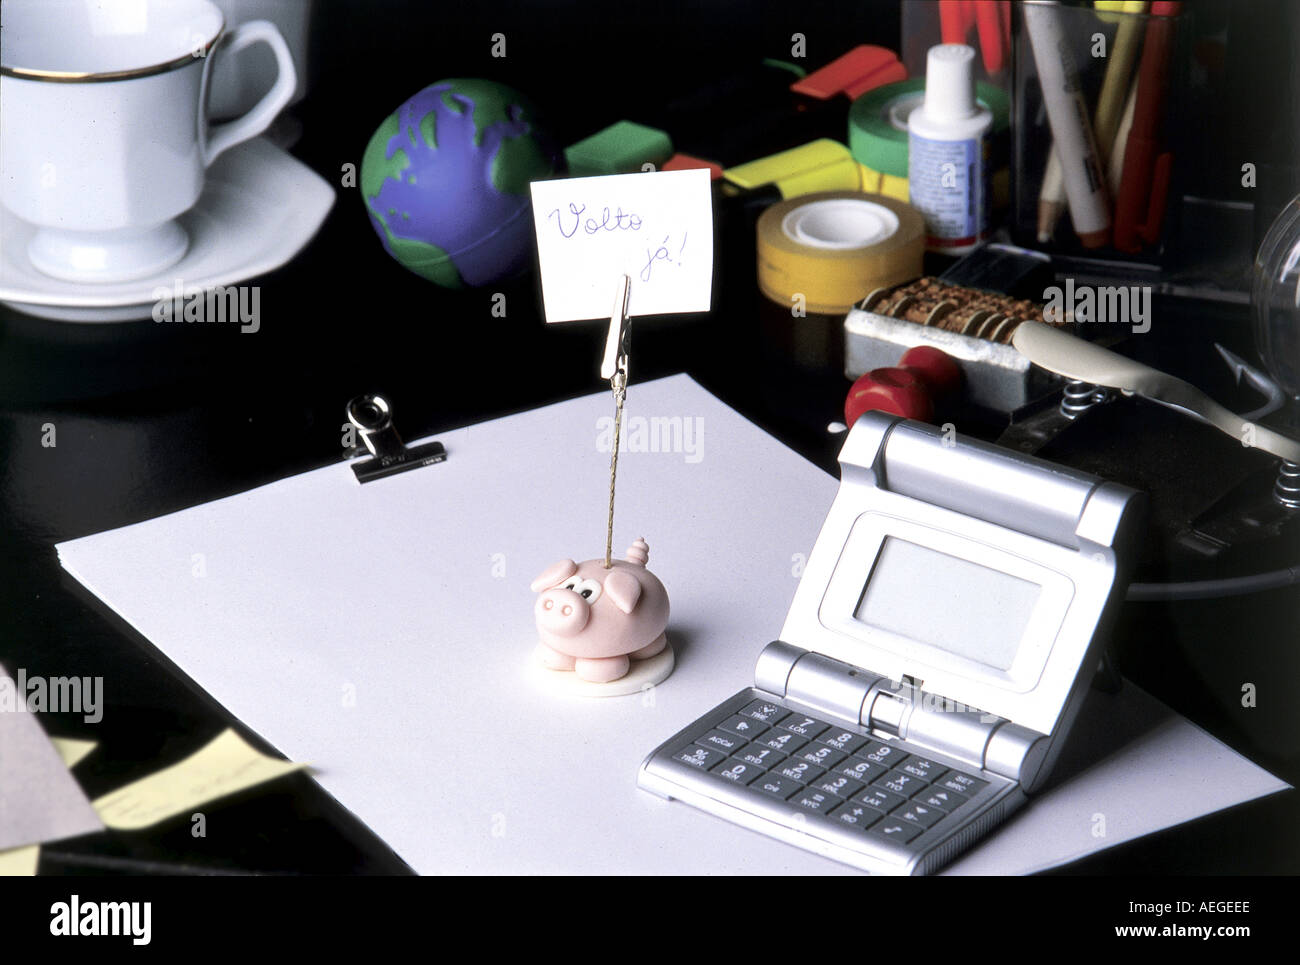 Office desk working calculator clock accent pieces paper stationery cup sellotape office objects be back soon conceptual time bu Stock Photo